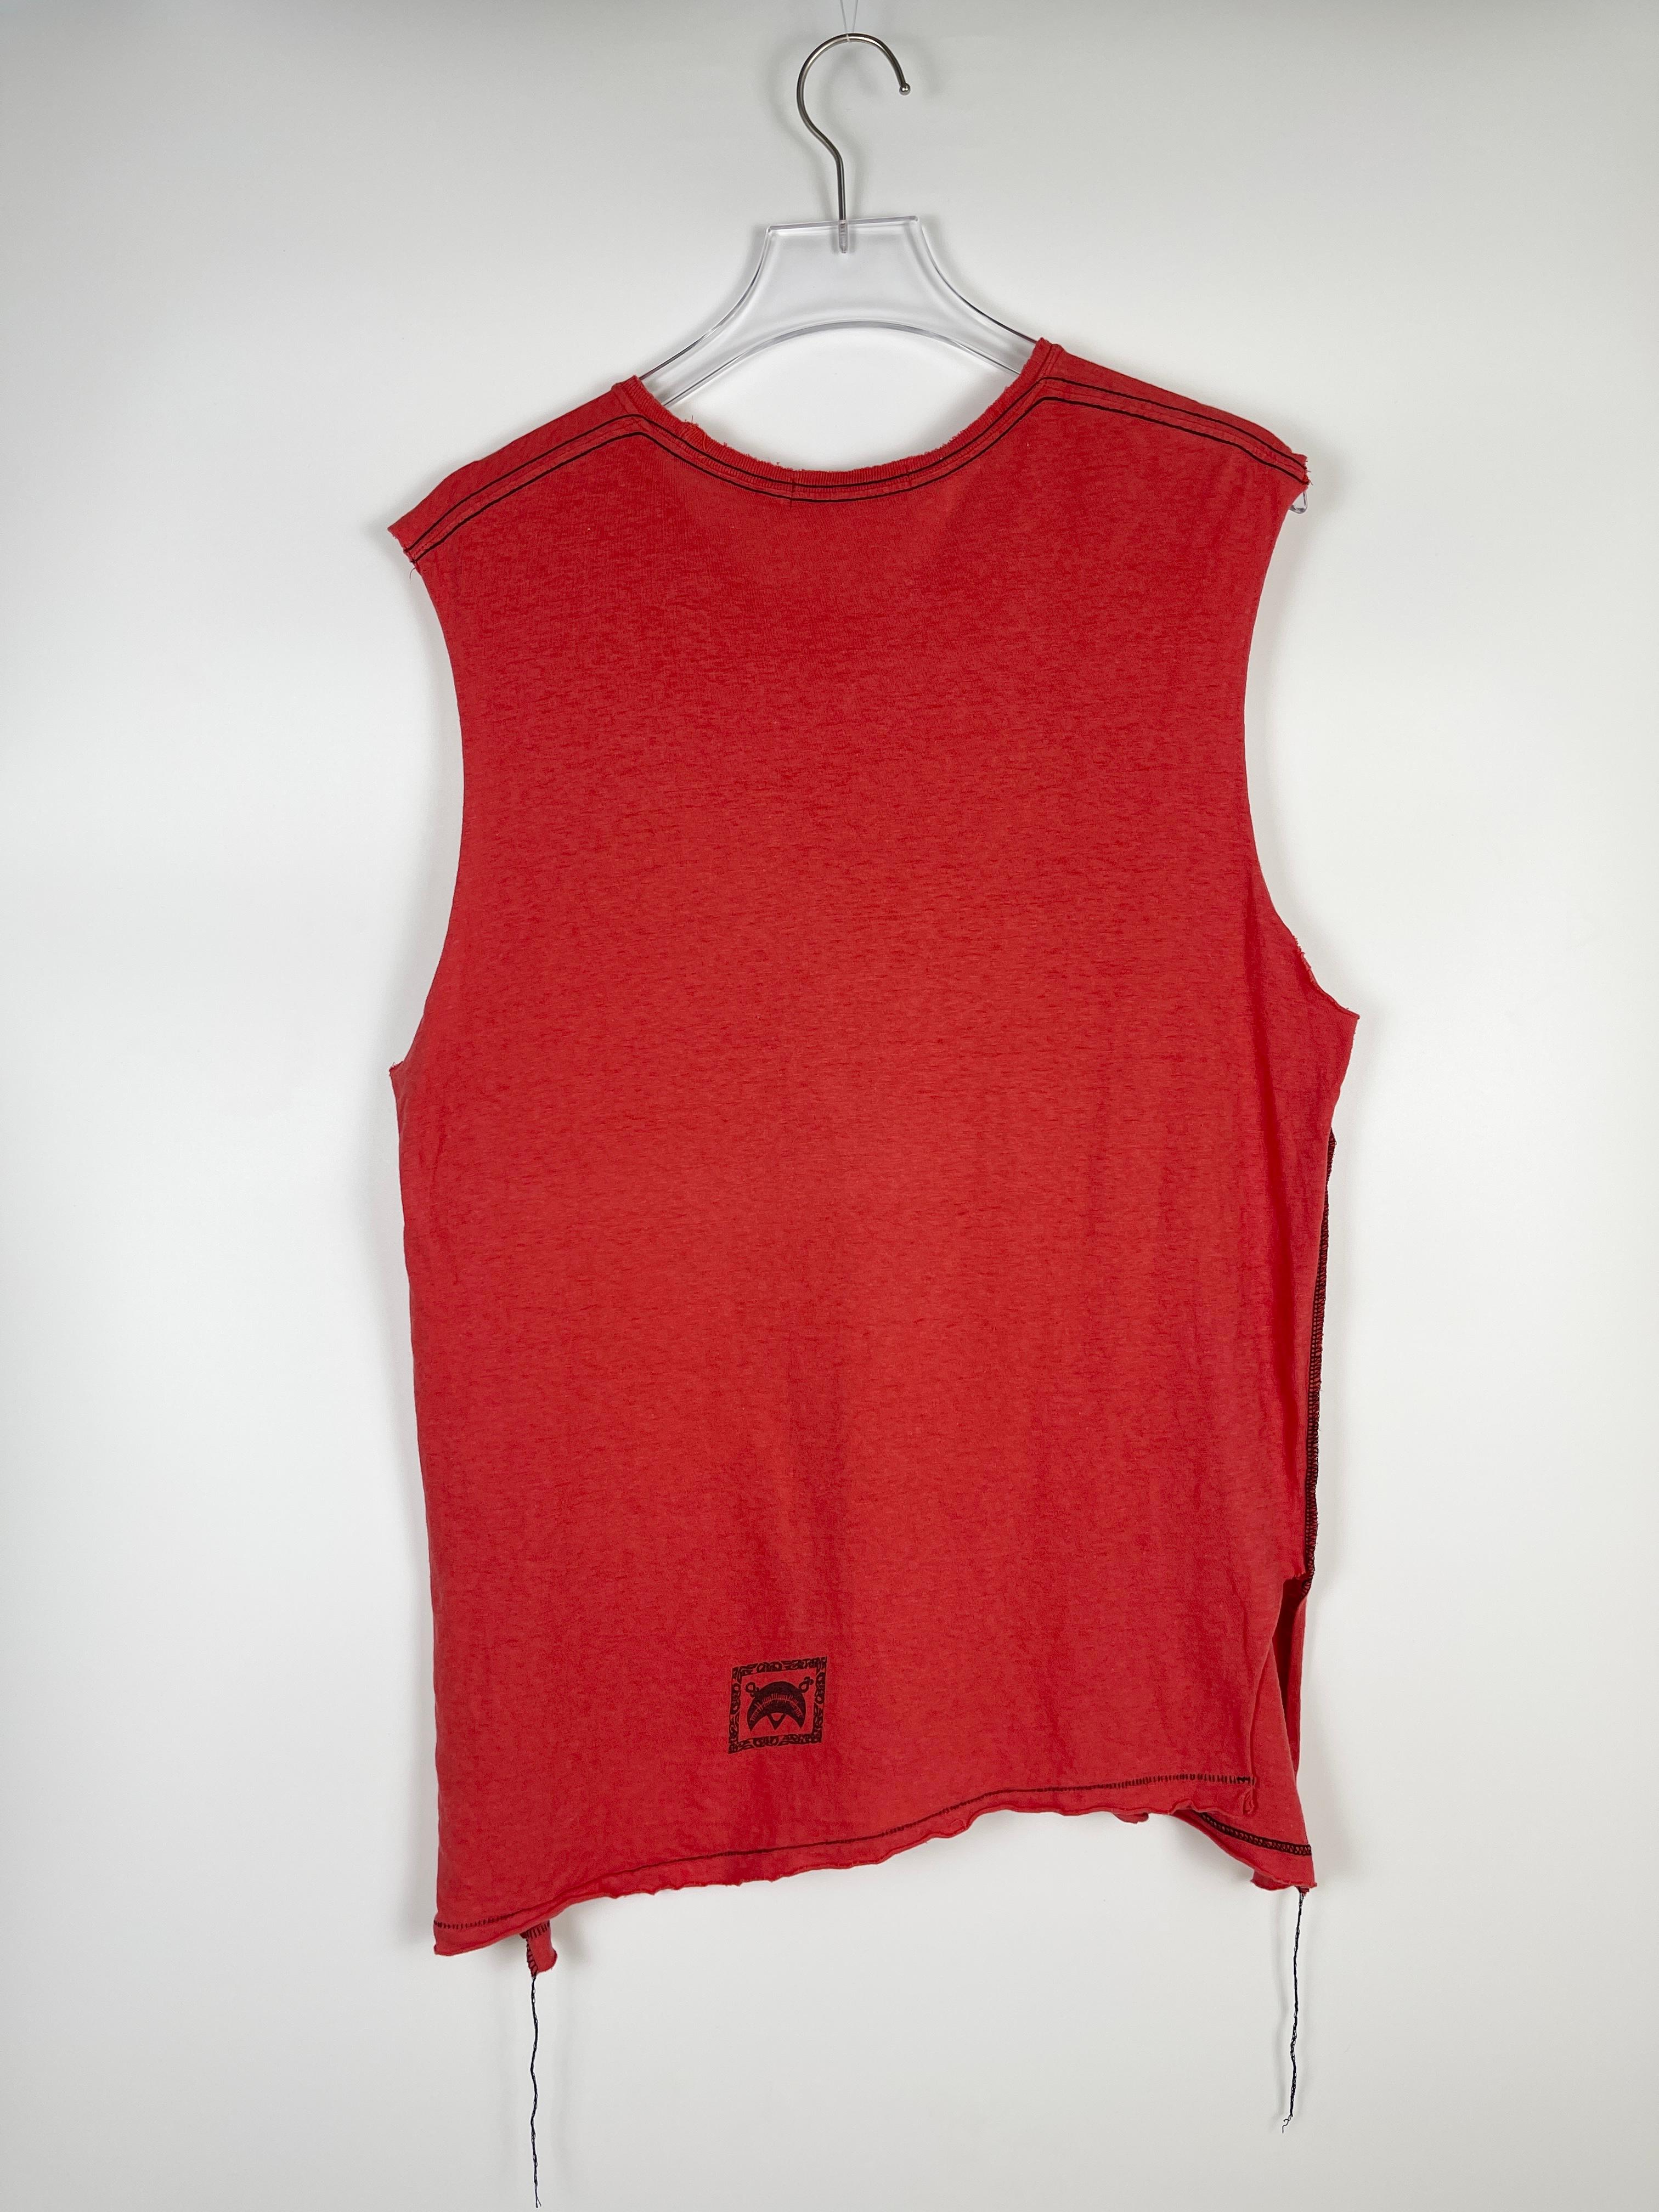 Undercover S/S2003 Scab Skull Tank-Top For Sale 3